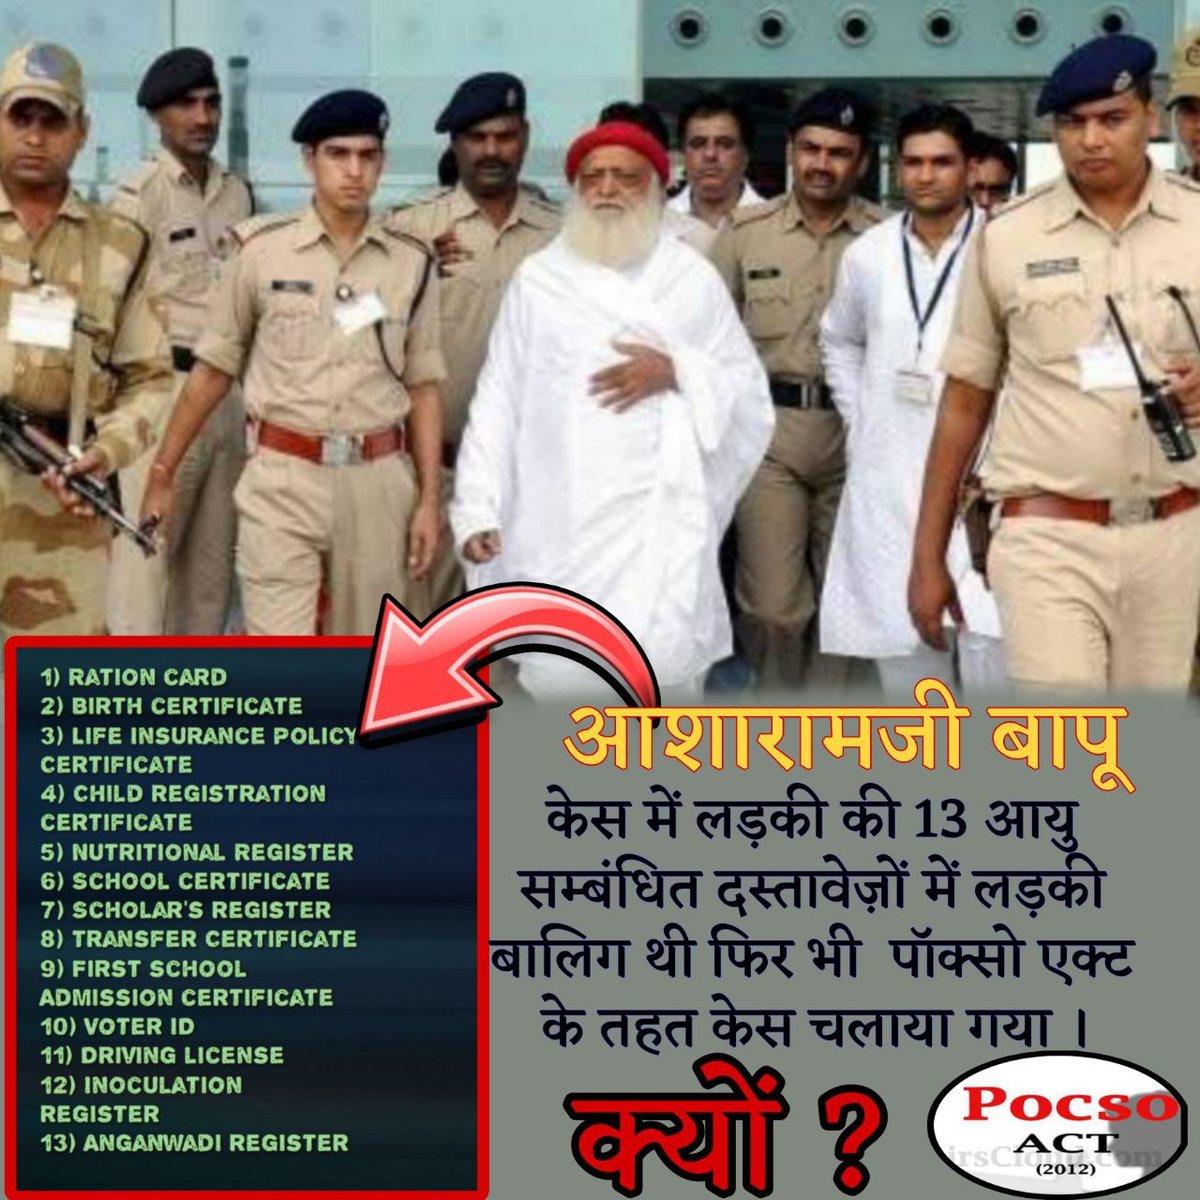 Sant Shri Asharamji Bapu is neither getting bail nor parole for the last 11 years and despite all the evidence of innocence, He is not getting Fair Justice‼️ Why such a big punishment for propagating Sanatan Dharma Today my request to the public #StandUpForDharma & For Bapuji ✊